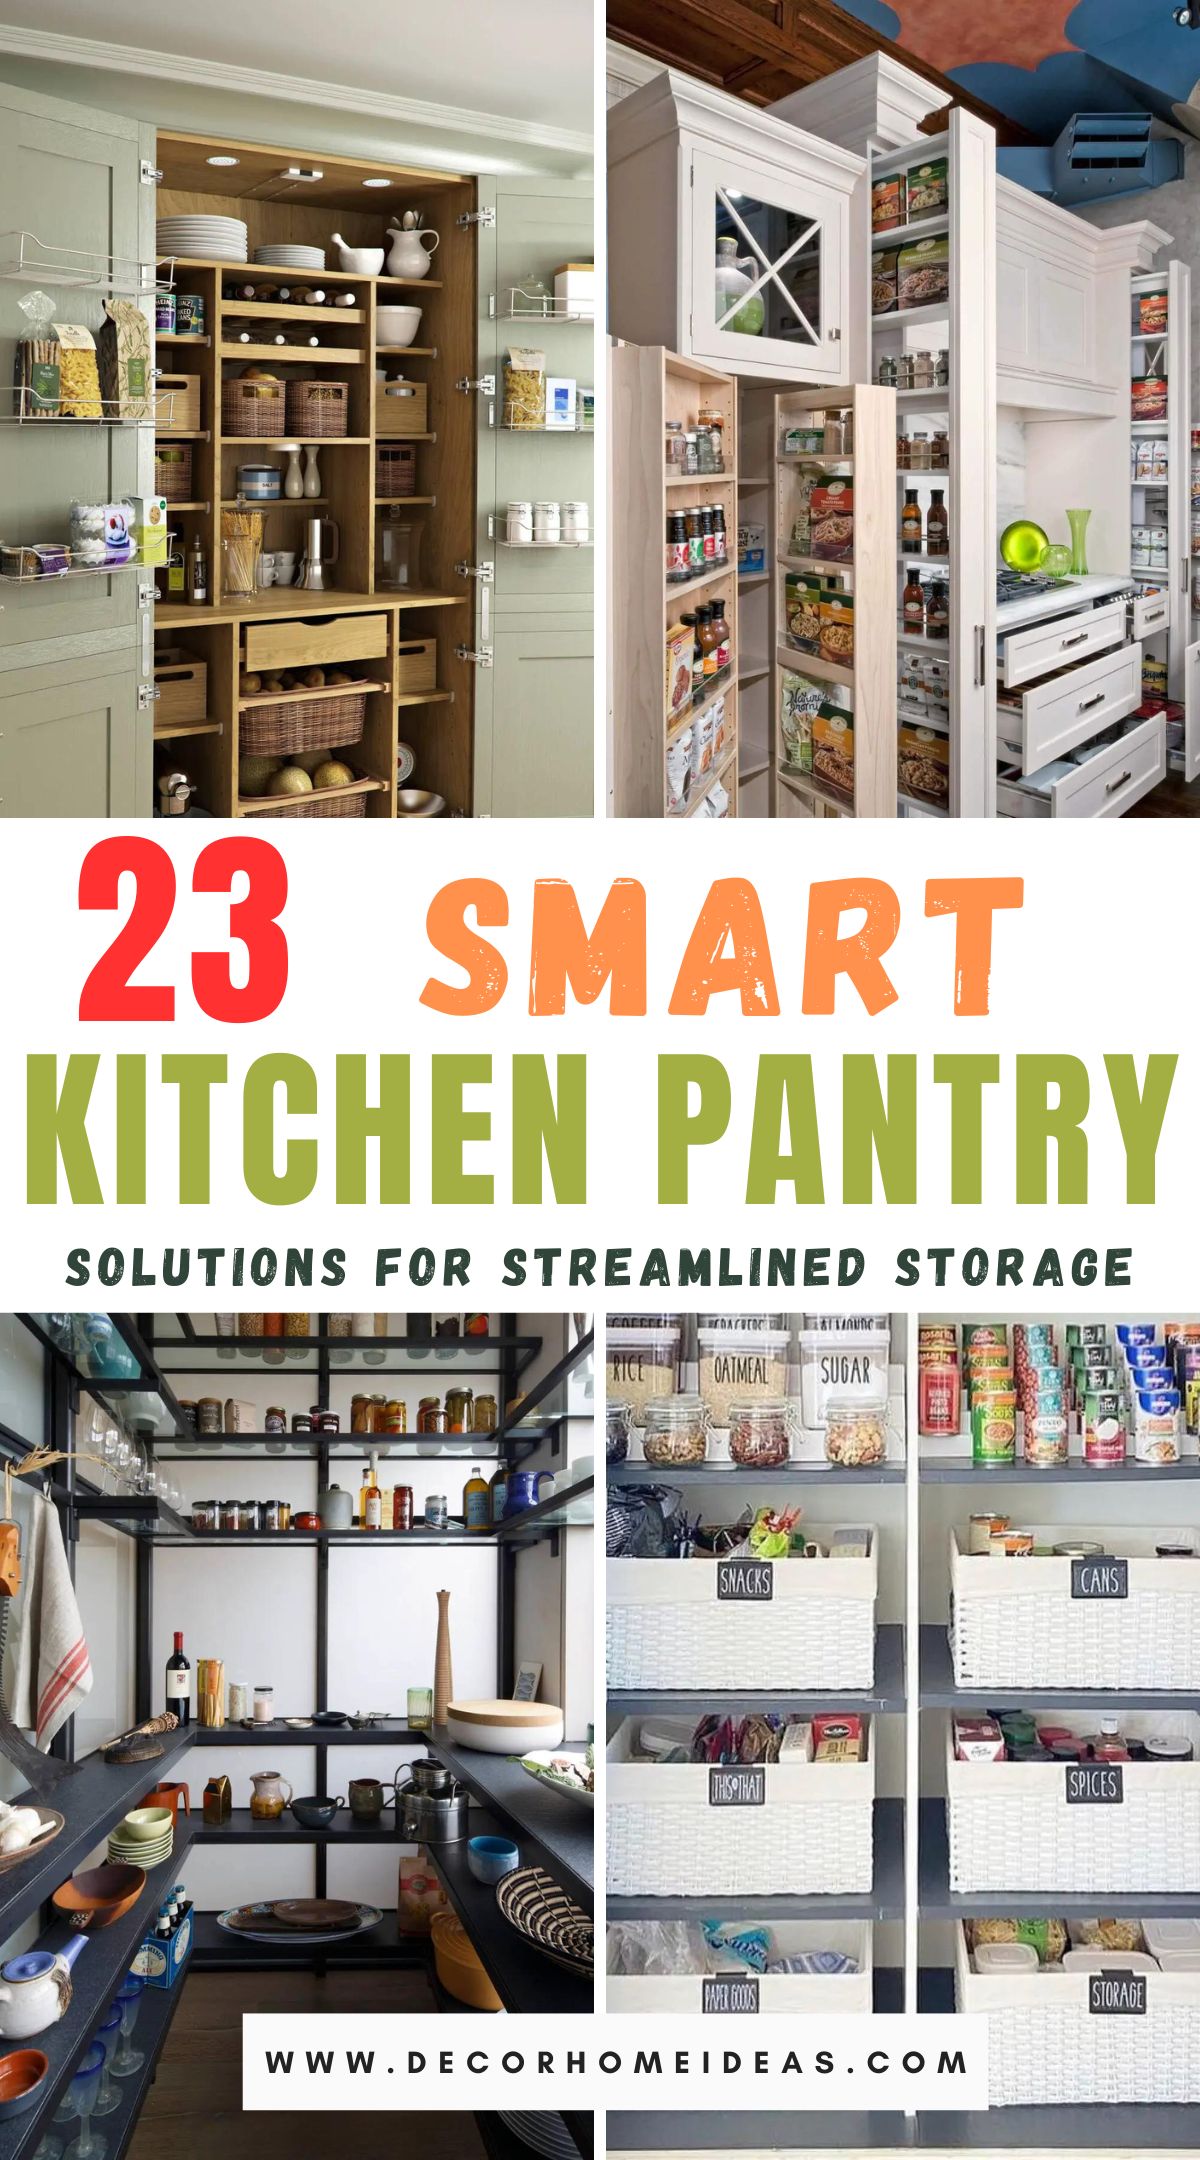 Maximize your kitchen storage efficiency with these 23 smart pantry ideas. Explore innovative solutions to keep your pantry organized and functional, ensuring you have everything you need at your fingertips.